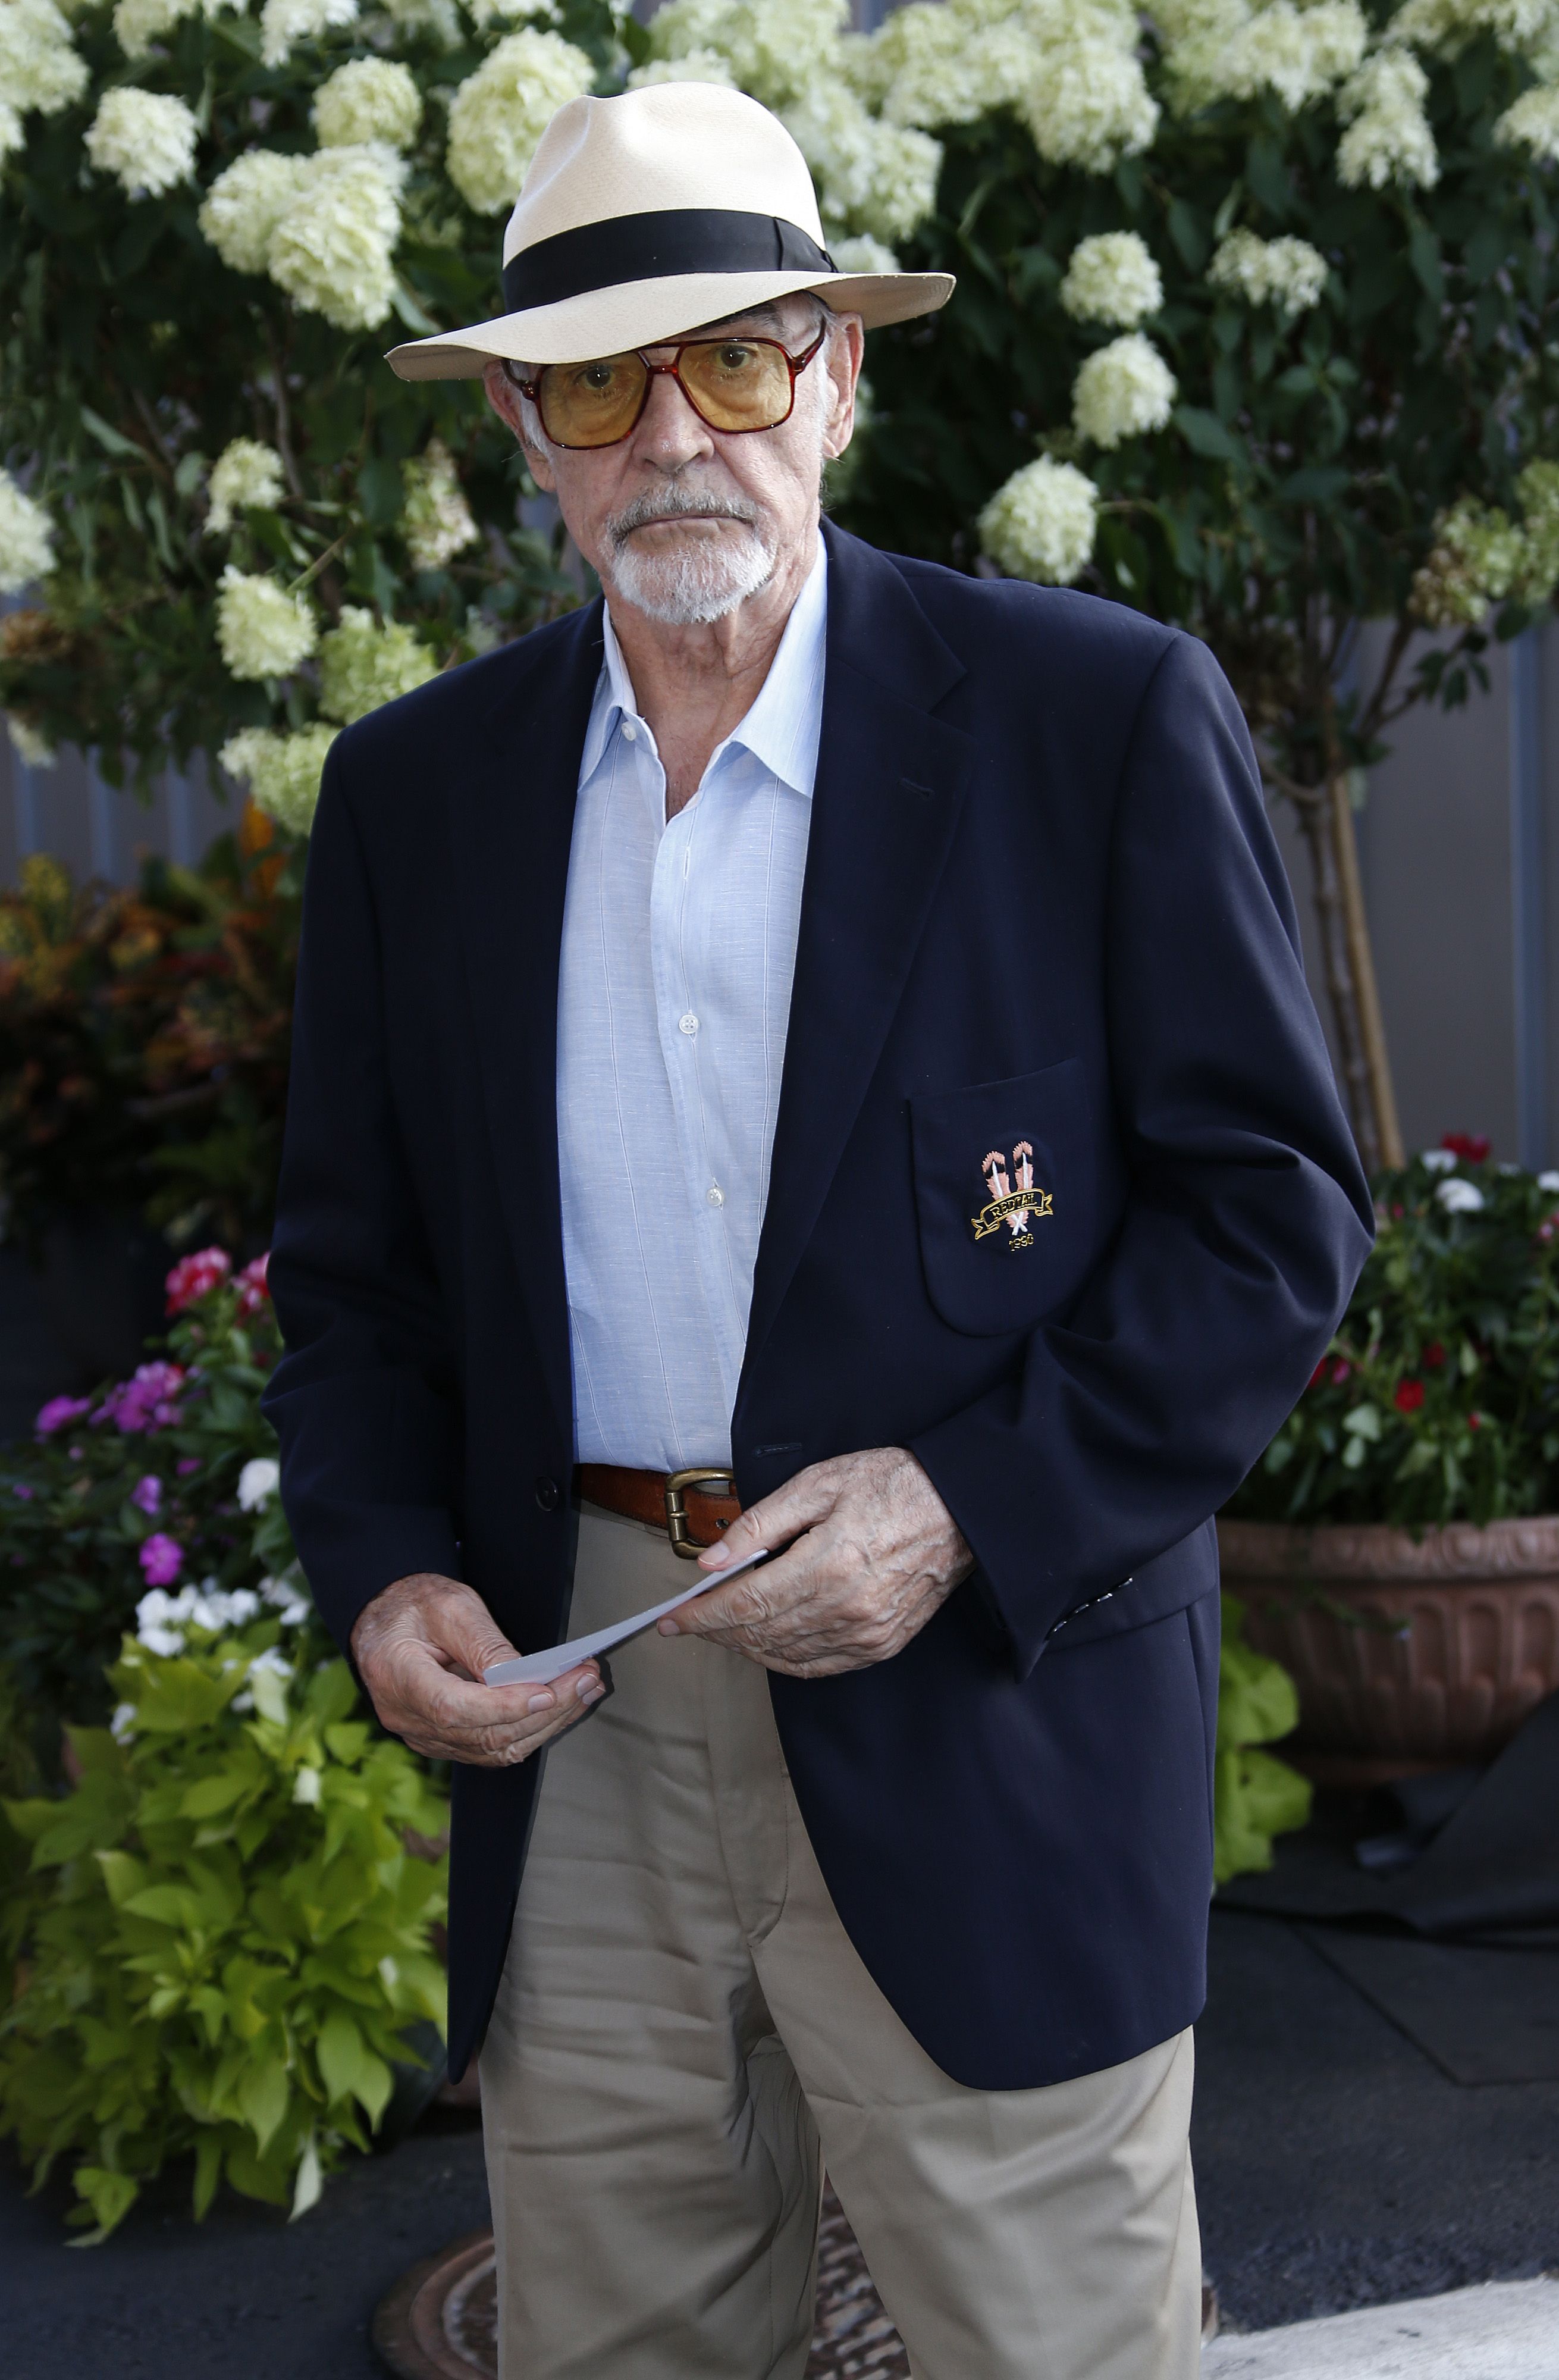 Sean Connery at day twelve of the 2015 US Open at USTA Billie Jean King National Tennis Center on September 11, 2015. | Photo: Getty Images